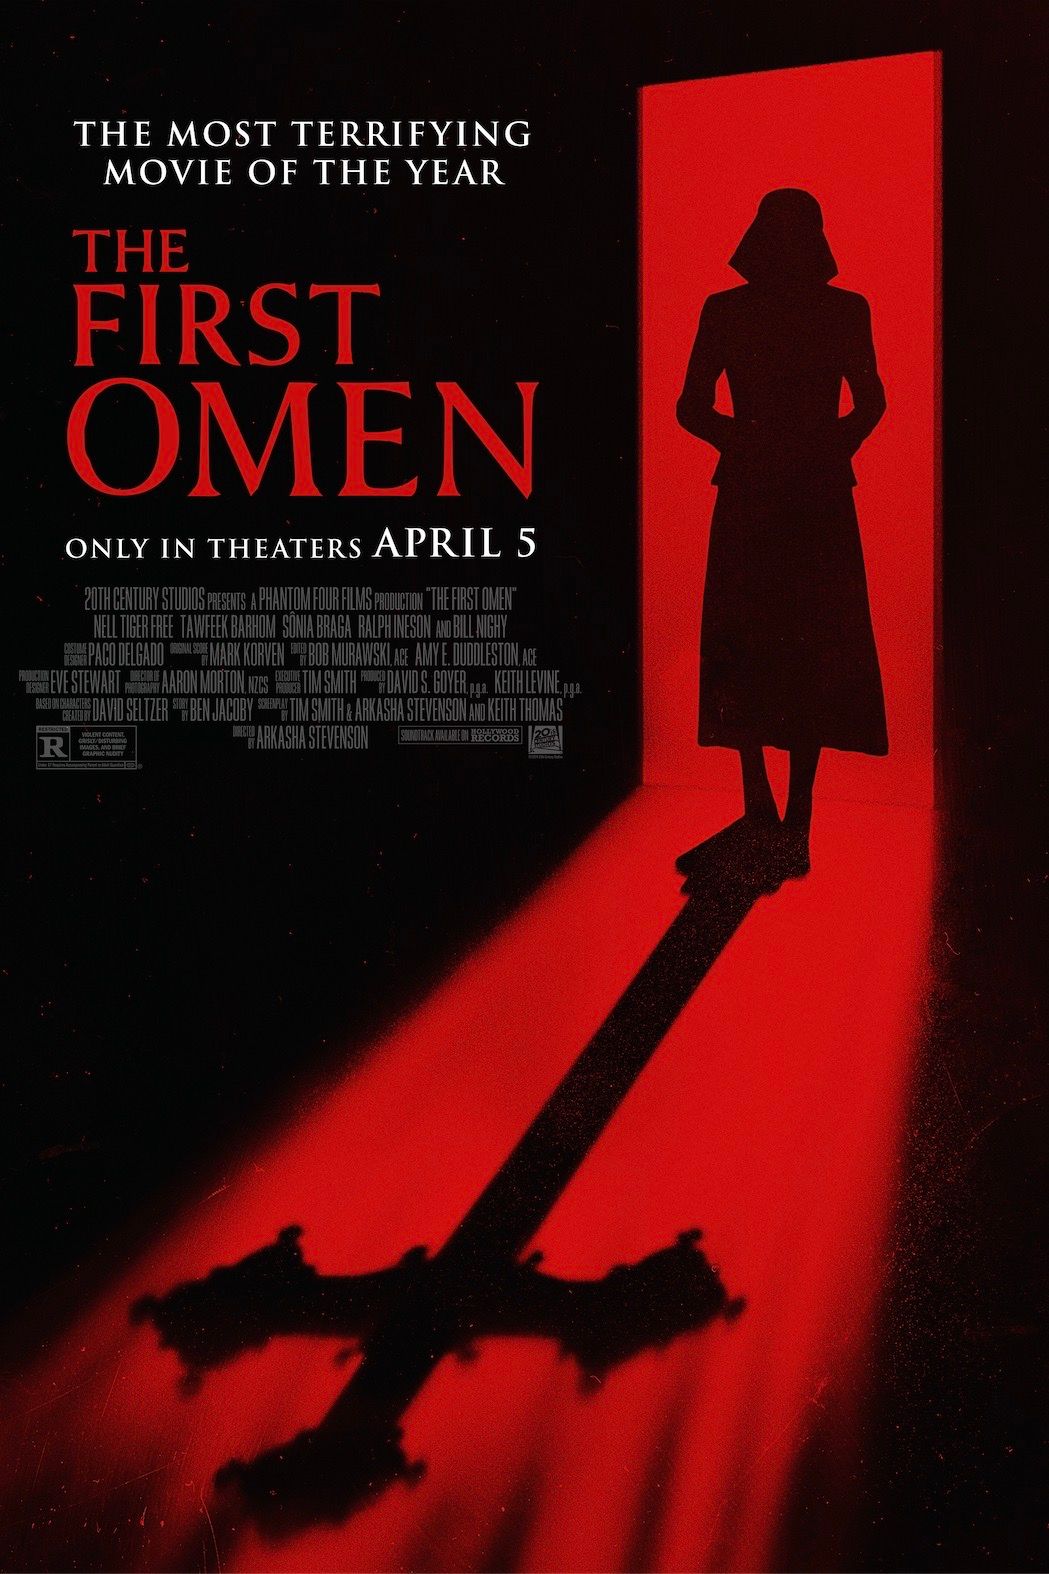 7 Biggest Changes The First Omen Makes To The Omen Franchise